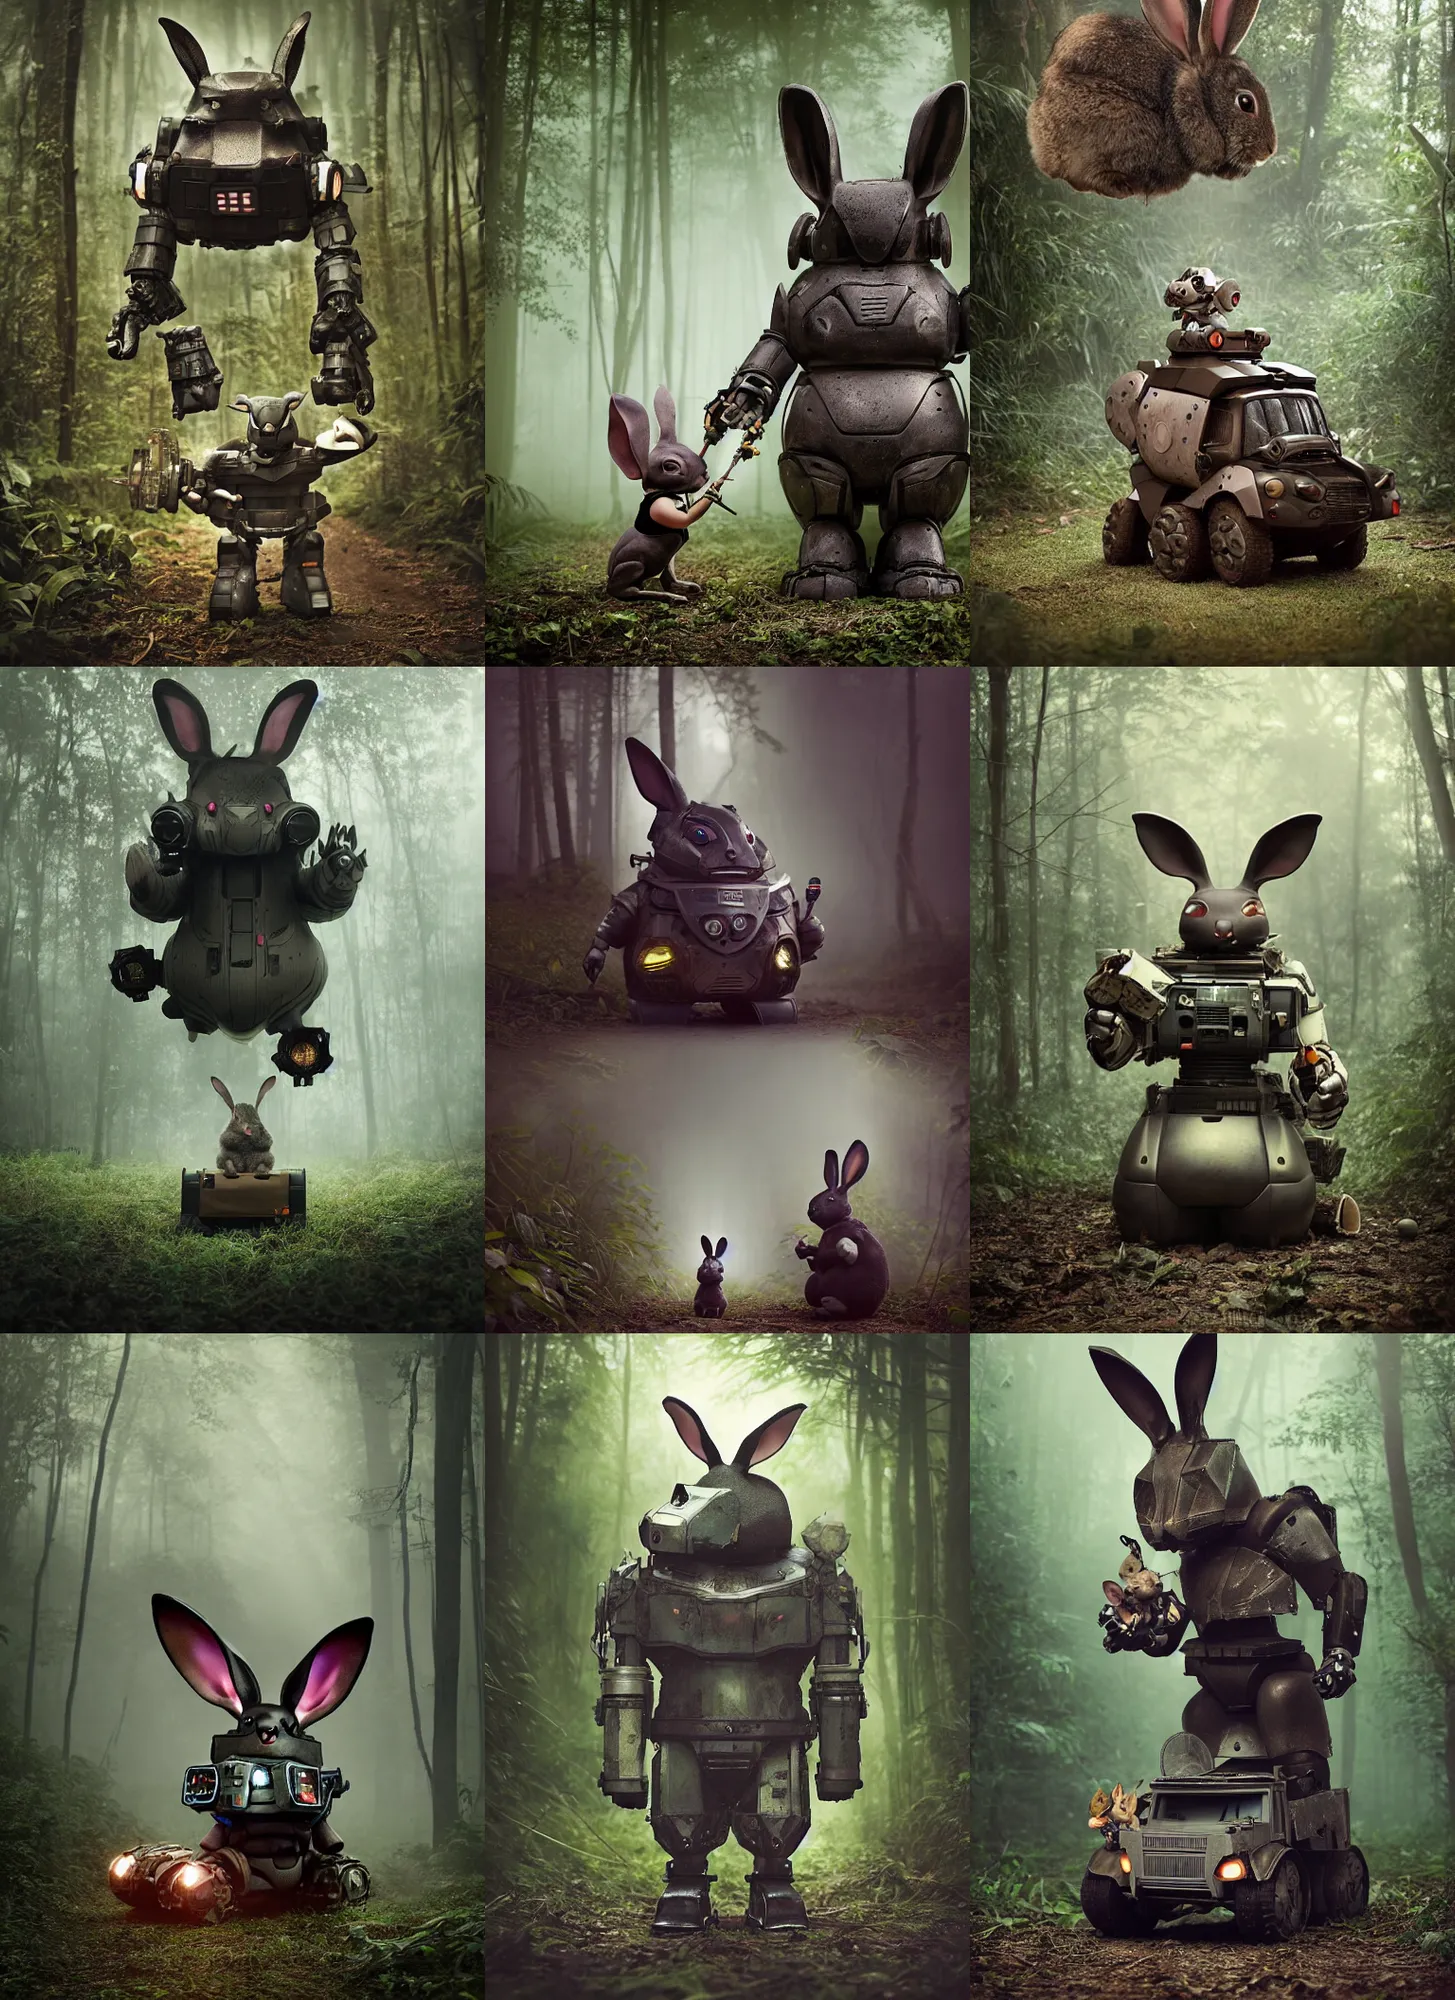 Prompt: dark night oversized battle rabbit robot chubby fatmech bucket vehicle with big ears with rabbit sitting inside, in jungle forest, full body, nighttime, cinematic focus, polaroid photo, vintage, neutral dull colors, soft lights, foggy, overcast by oleg oprisco, by thomas peschak, by discovery channel, by victor enrich, by gregory crewdson